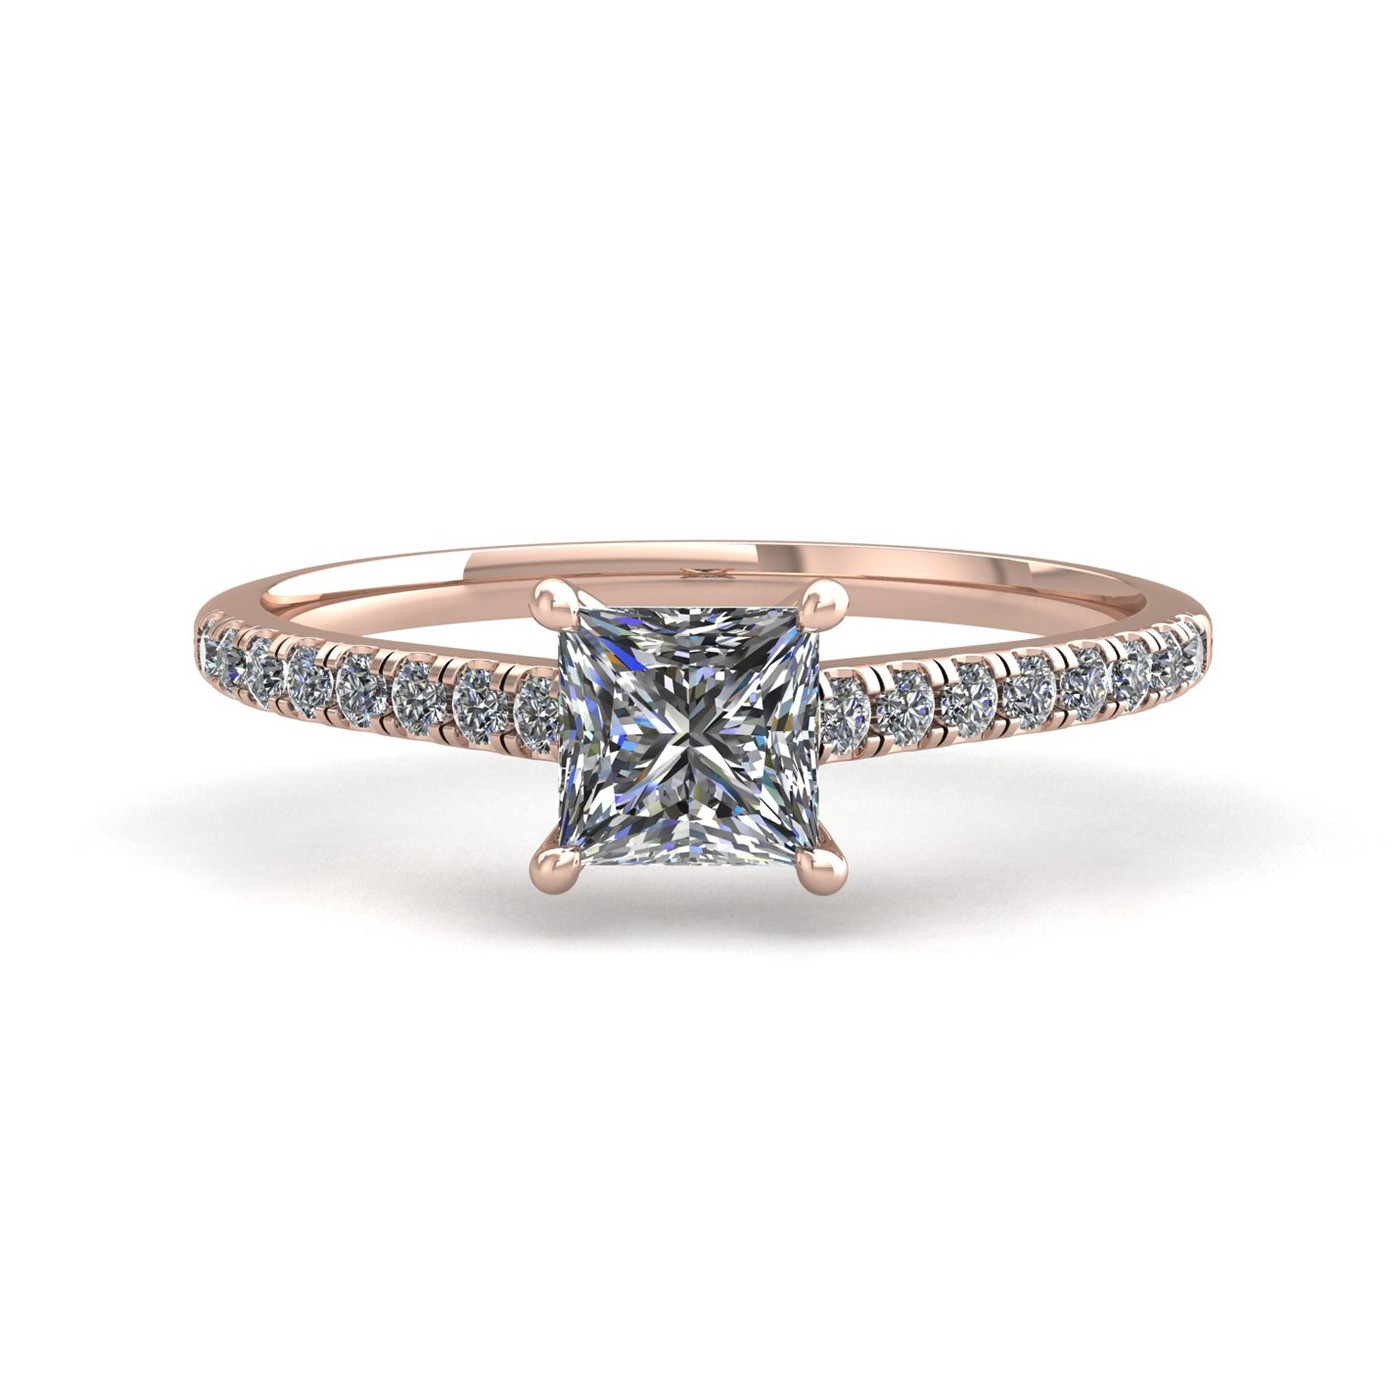 18k rose gold 0,50 ct 4 prongs princess cut diamond engagement ring with whisper thin pavÉ set band Photos & images